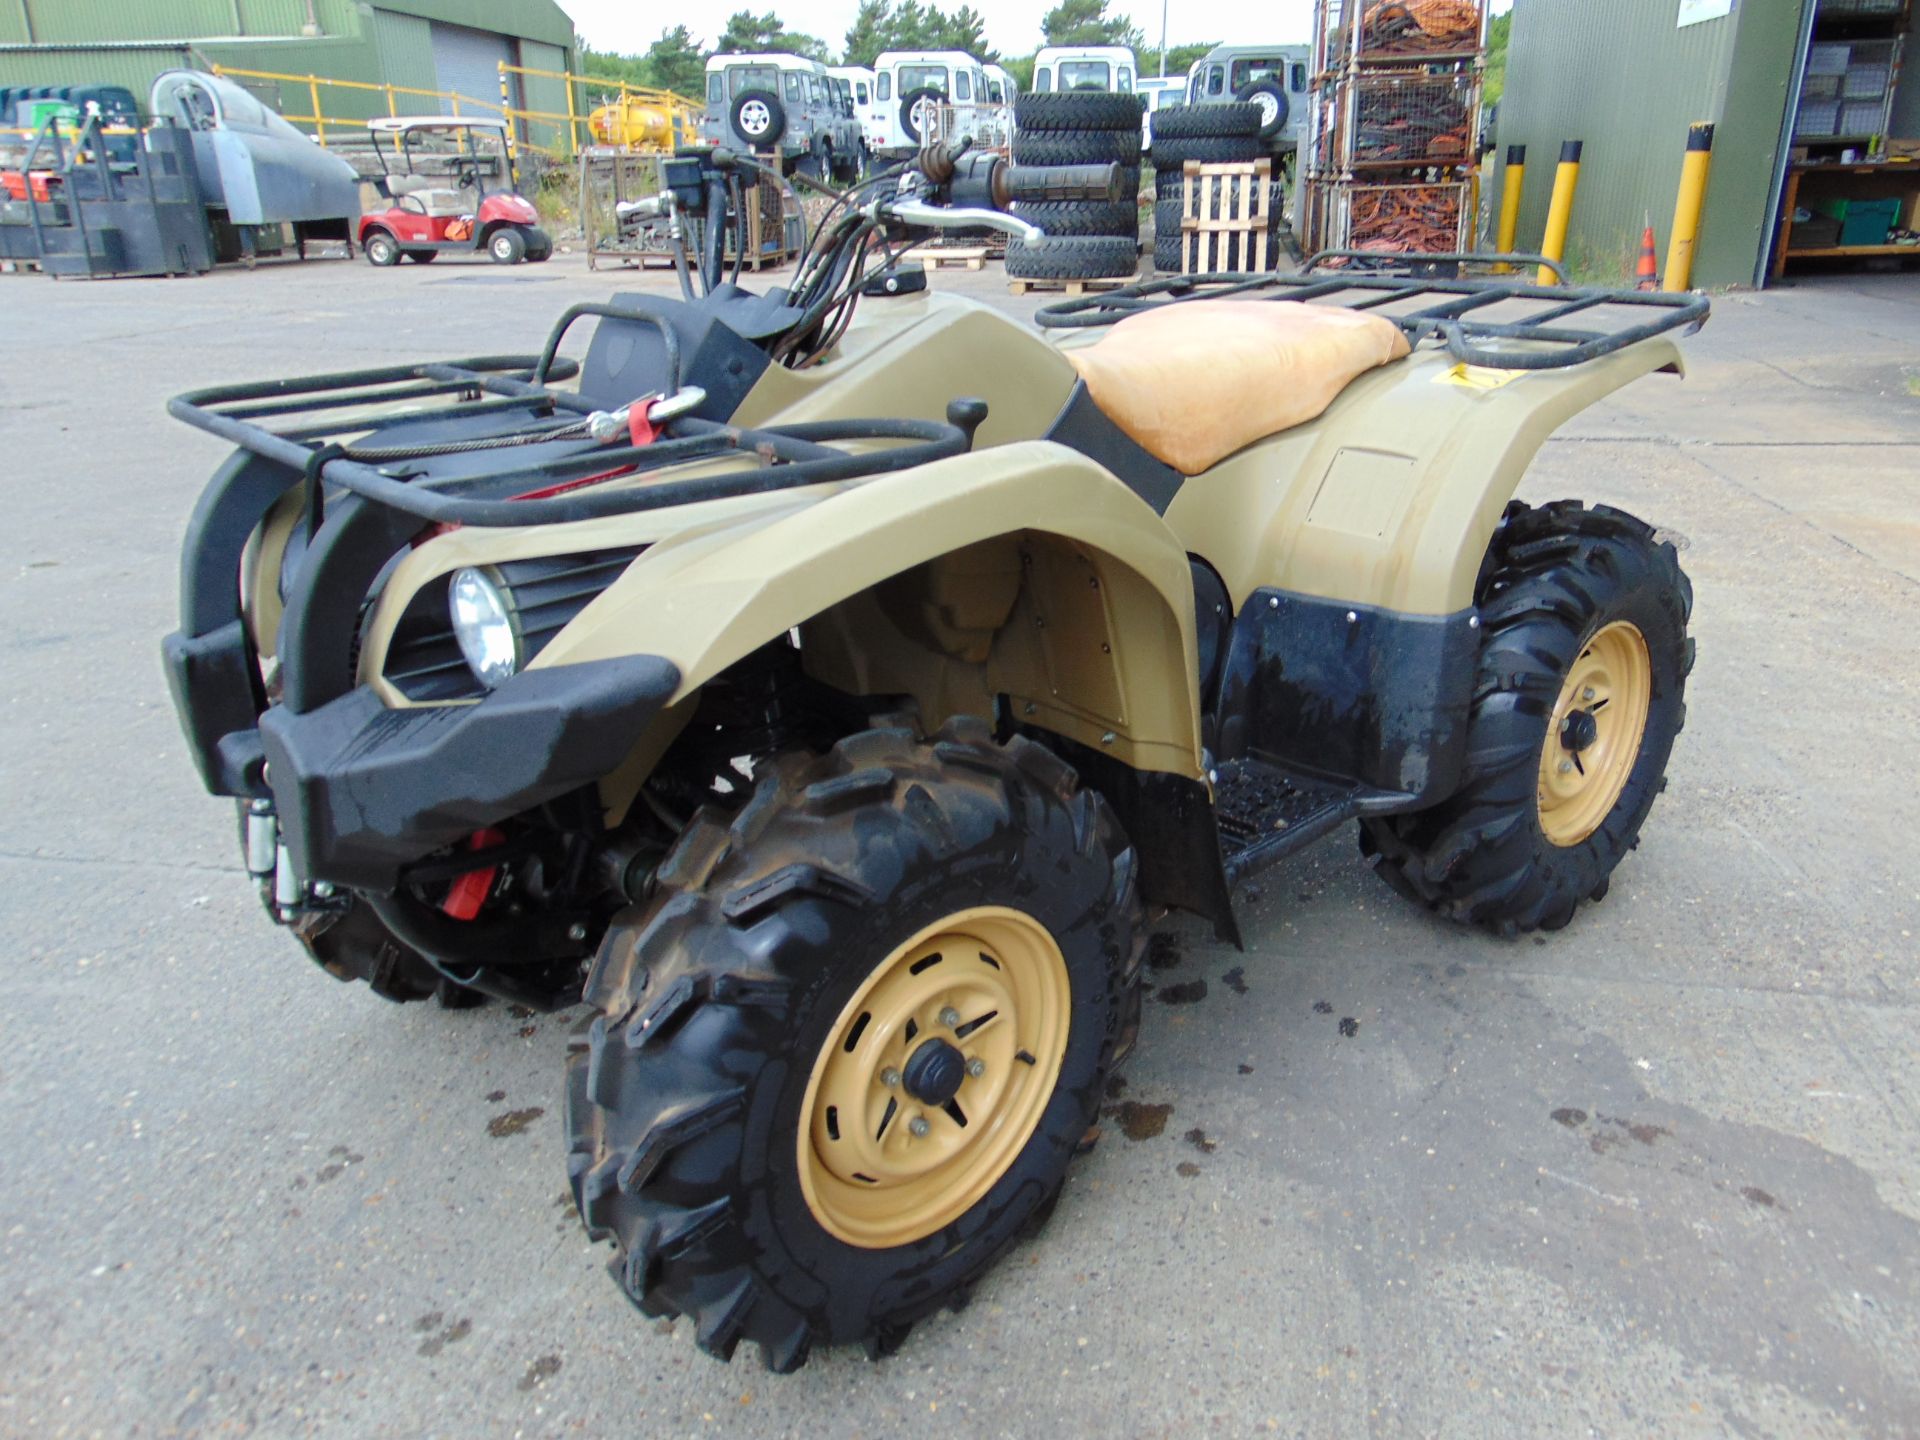 Military Specification Yamaha Grizzly 450 4 x 4 ATV Quad Bike ONLY 213 HOURS! - Image 3 of 18